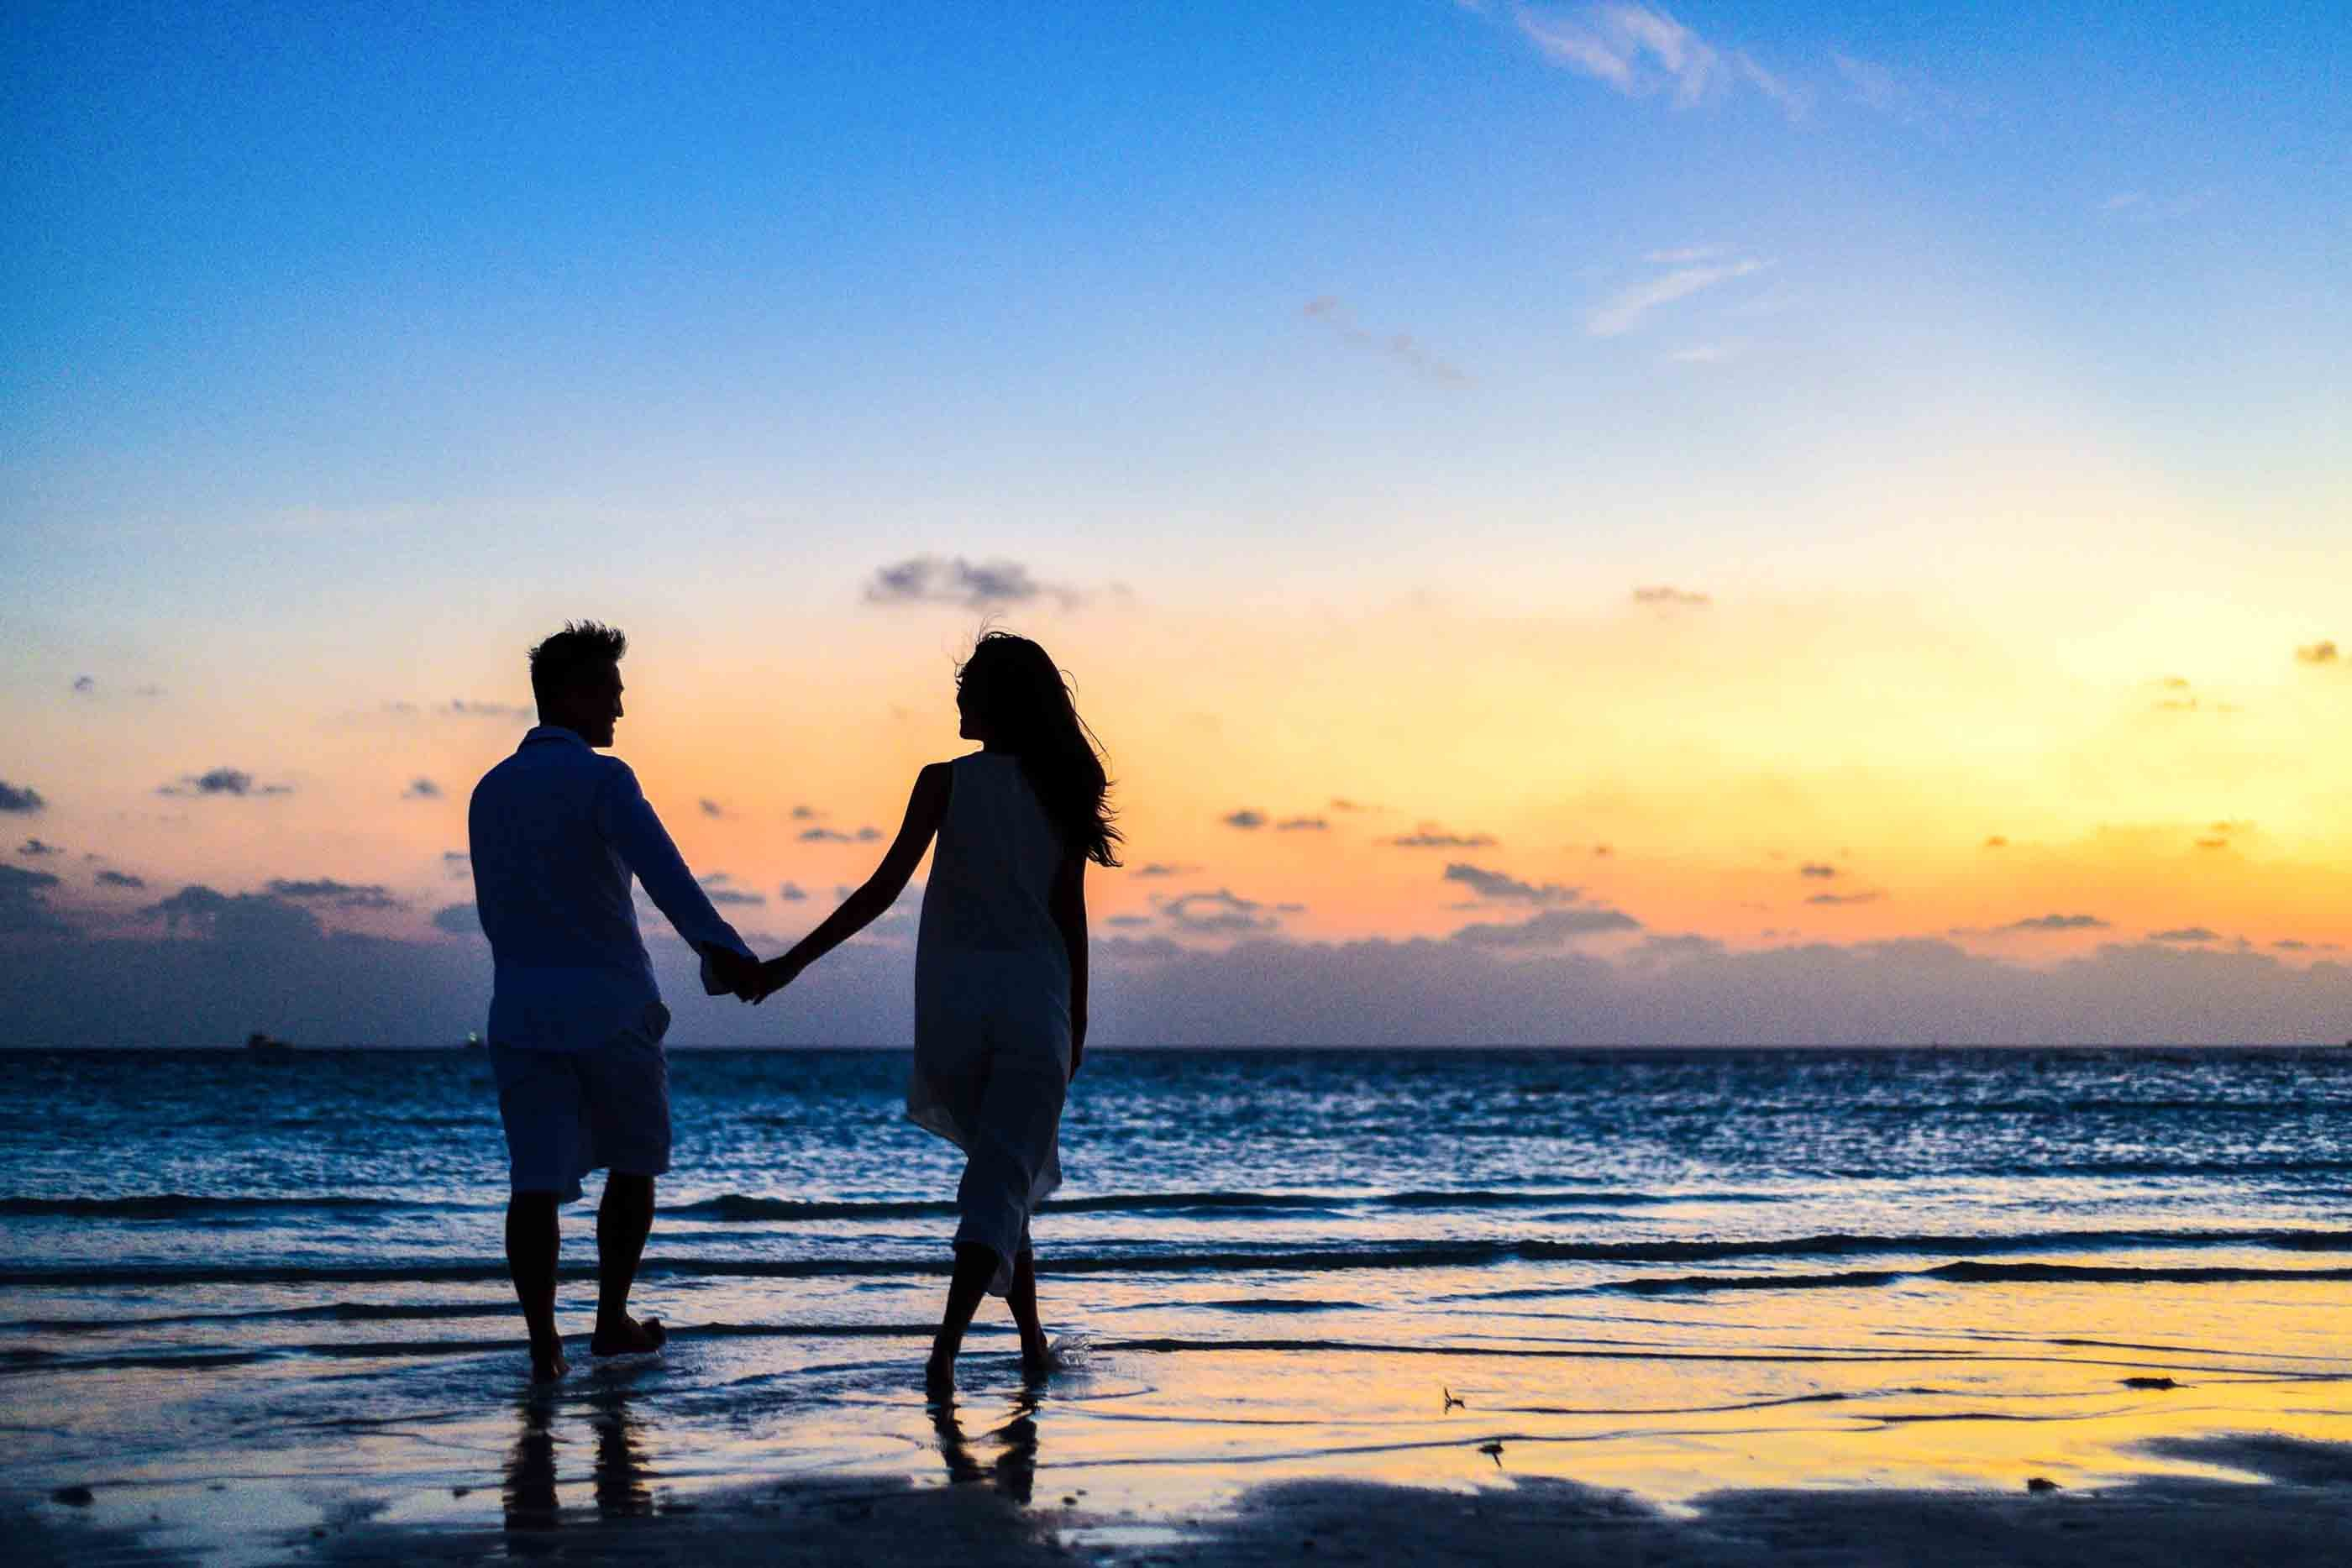 life insurance options for domestic partners